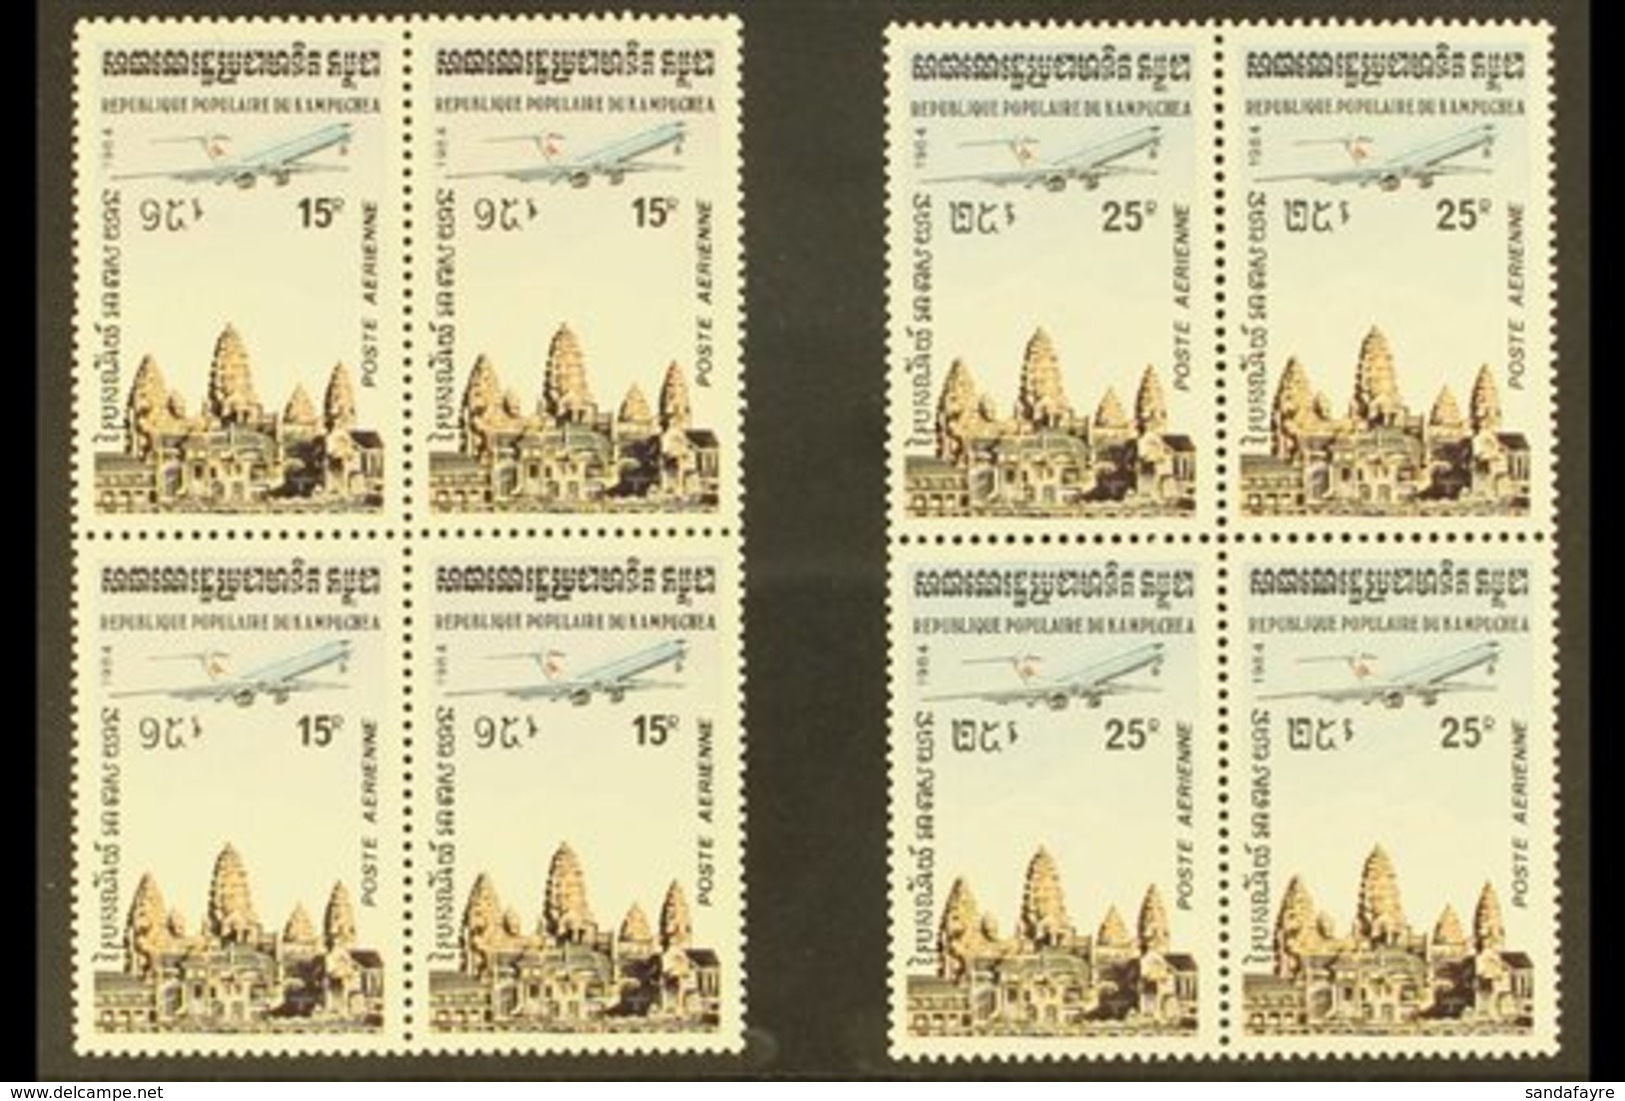 \Y AIRCRAFT\Y CAMBODIA 1984 Air Complete Set (Yvert 32/35, SG 504/07), Superb Never Hinged Mint BLOCKS Of 4, Fresh. (4 B - Unclassified